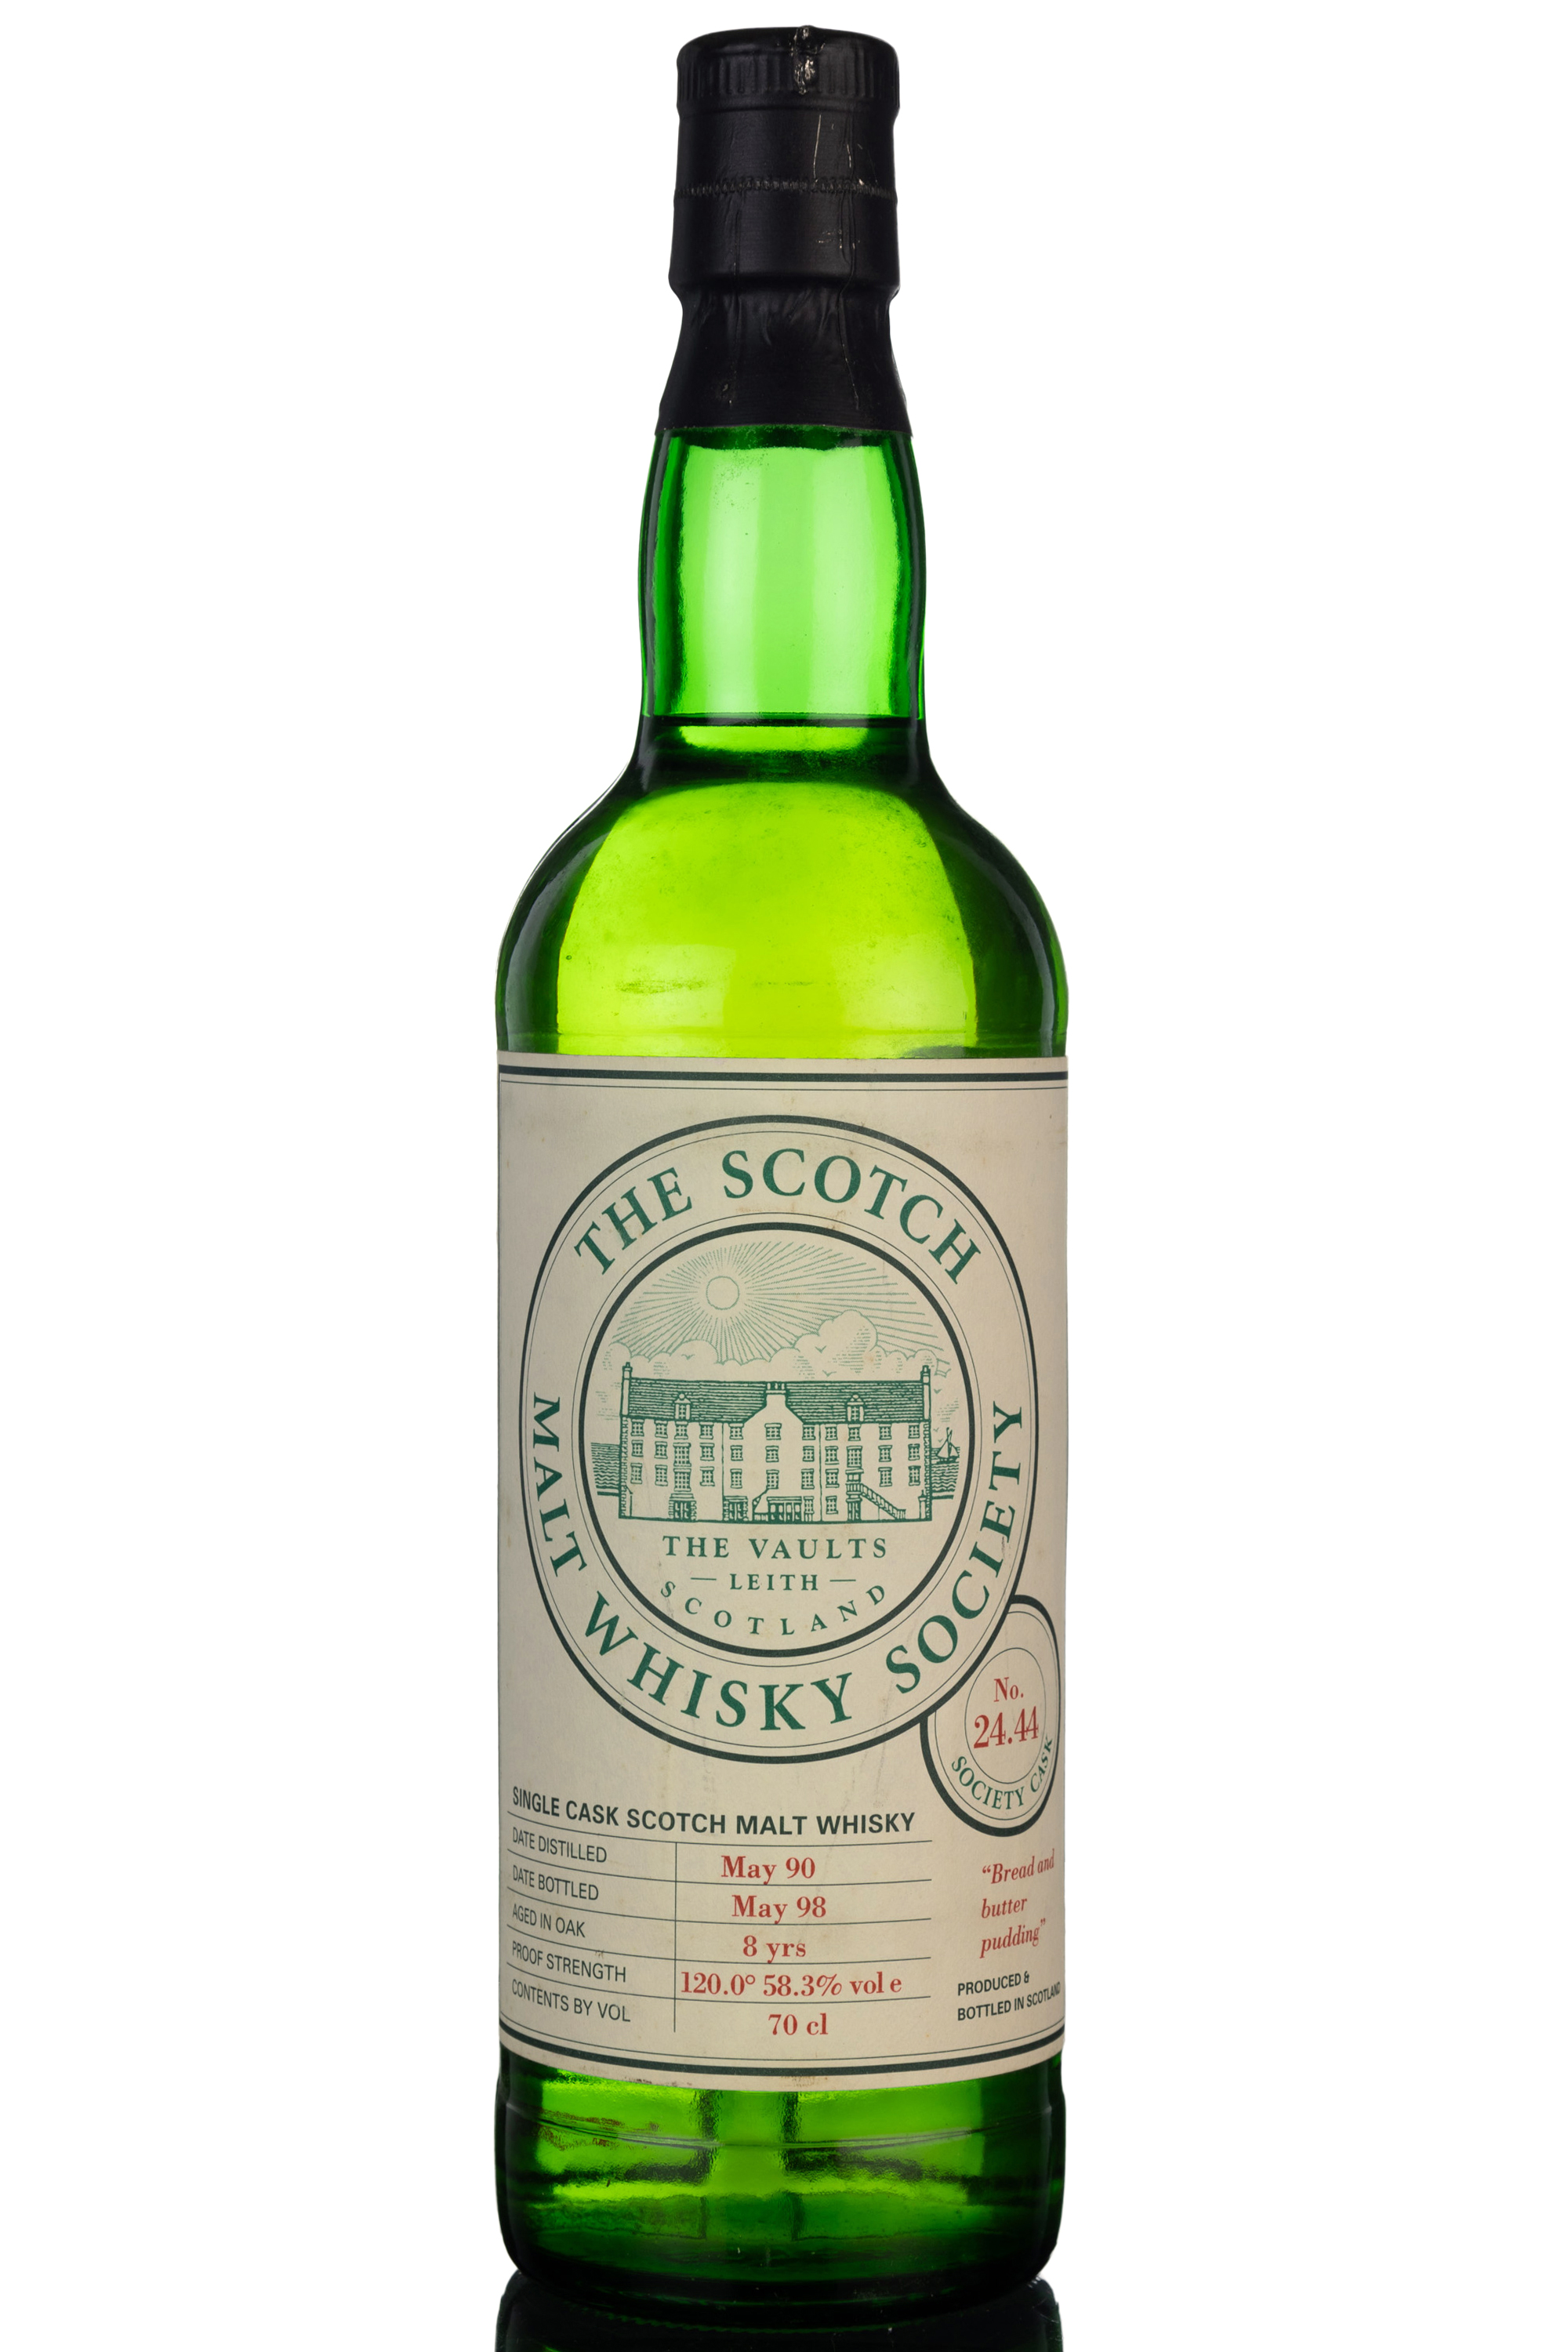 Macallan 1990-1998 - 8 Year Old - SMWS 24.44 - Bread & Butter Pudding